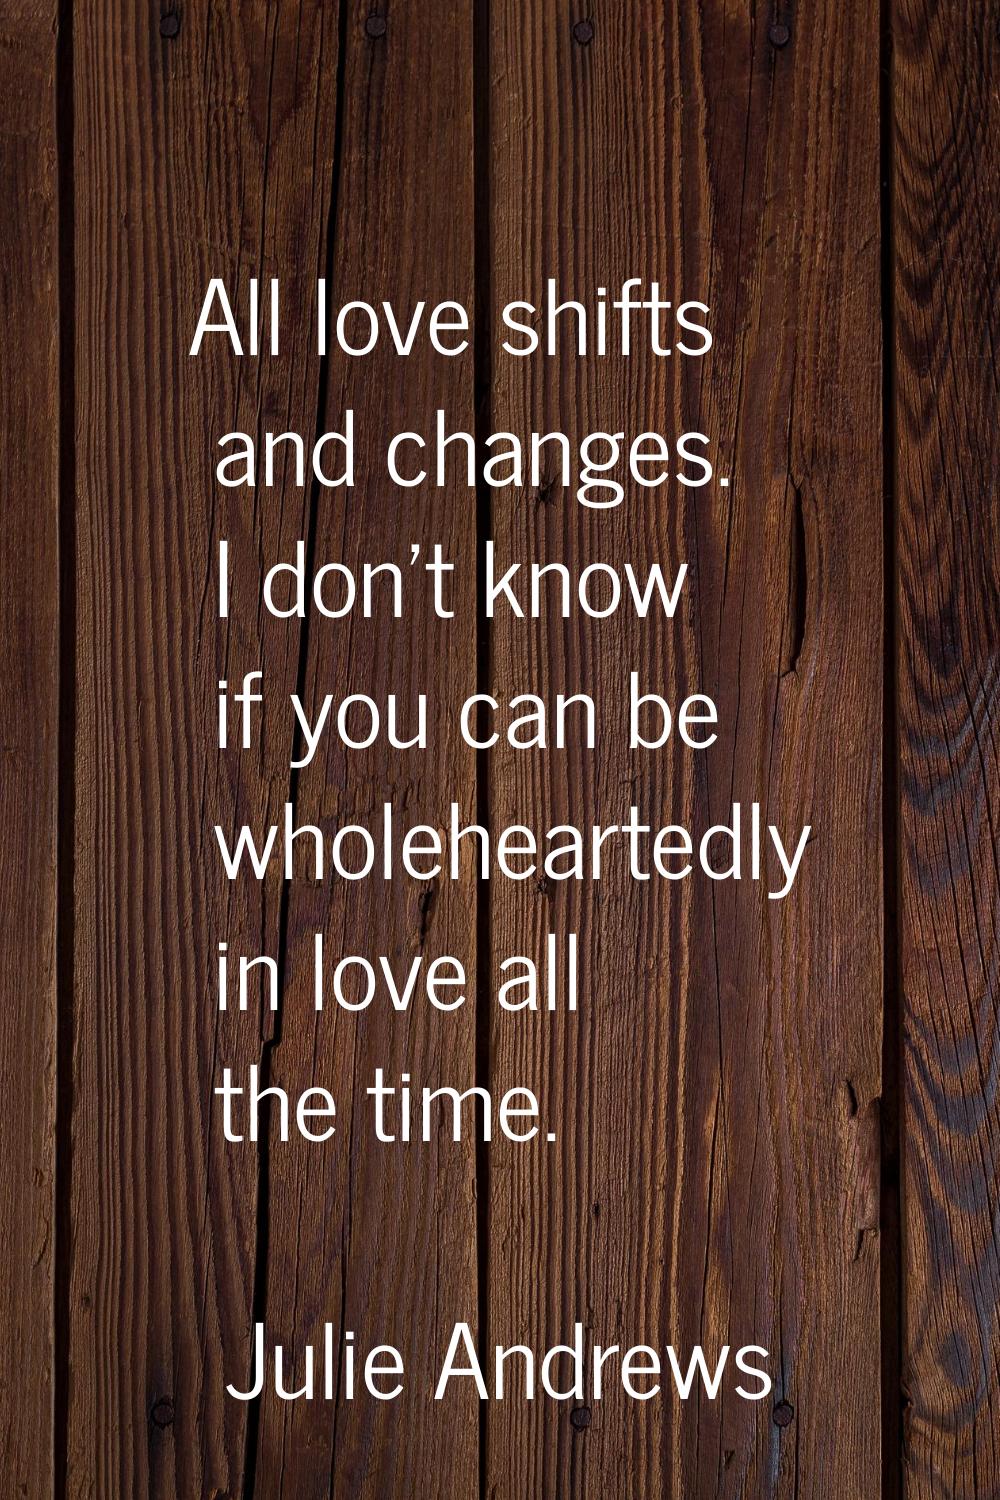 All love shifts and changes. I don't know if you can be wholeheartedly in love all the time.